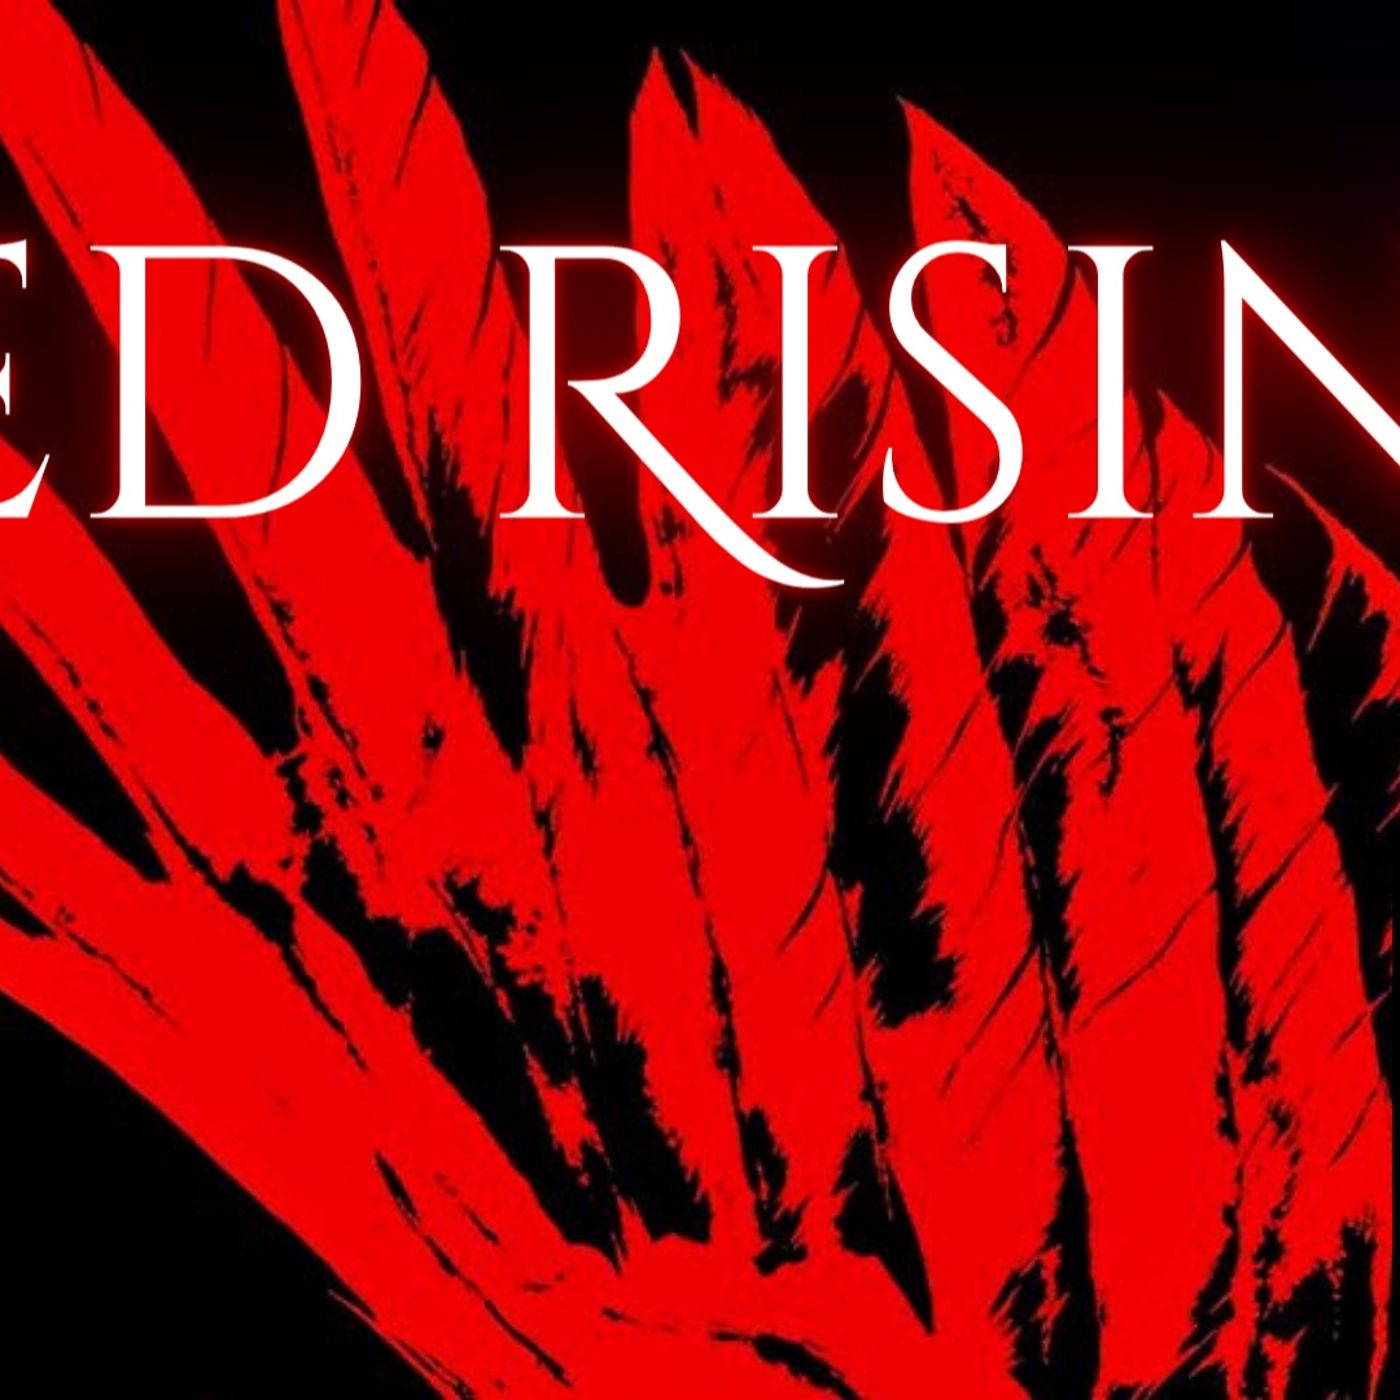 Red Rising, Chapters 19-24